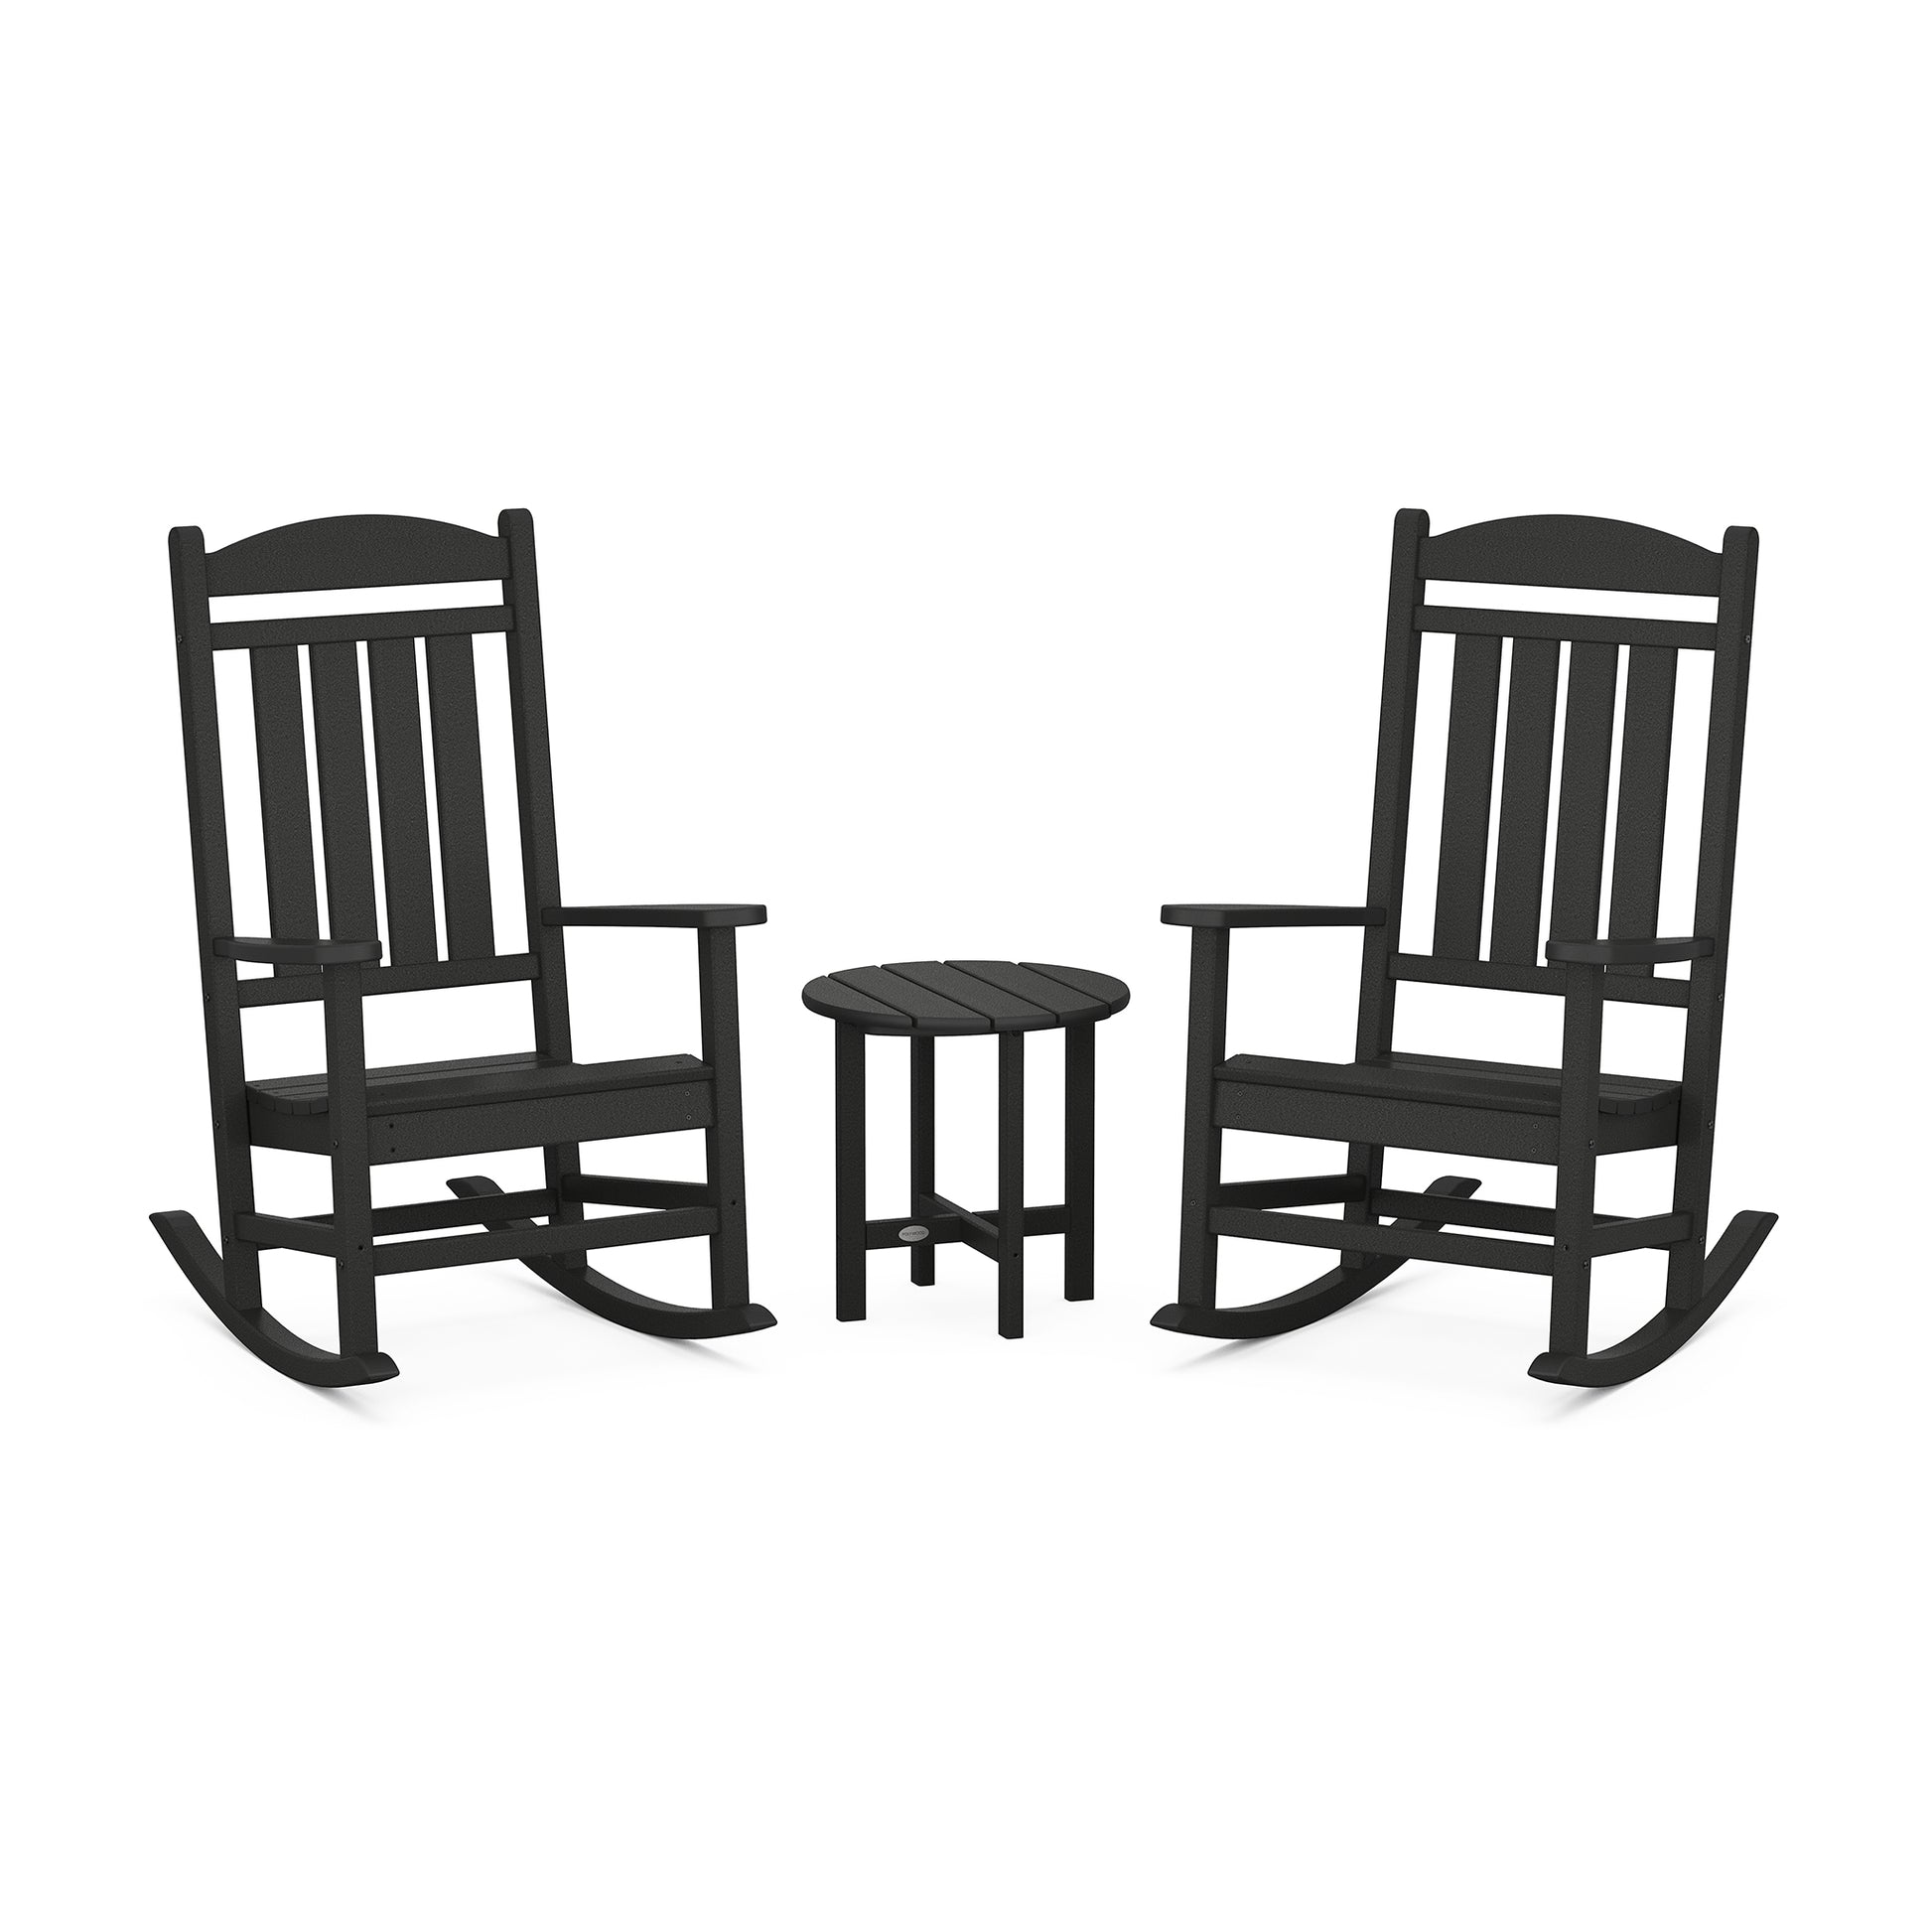 Two black POLYWOOD Presidential 3-Piece Rocker Sets and a small round stool positioned between them on a white background. The chairs face each other, suggesting a conversational setting.